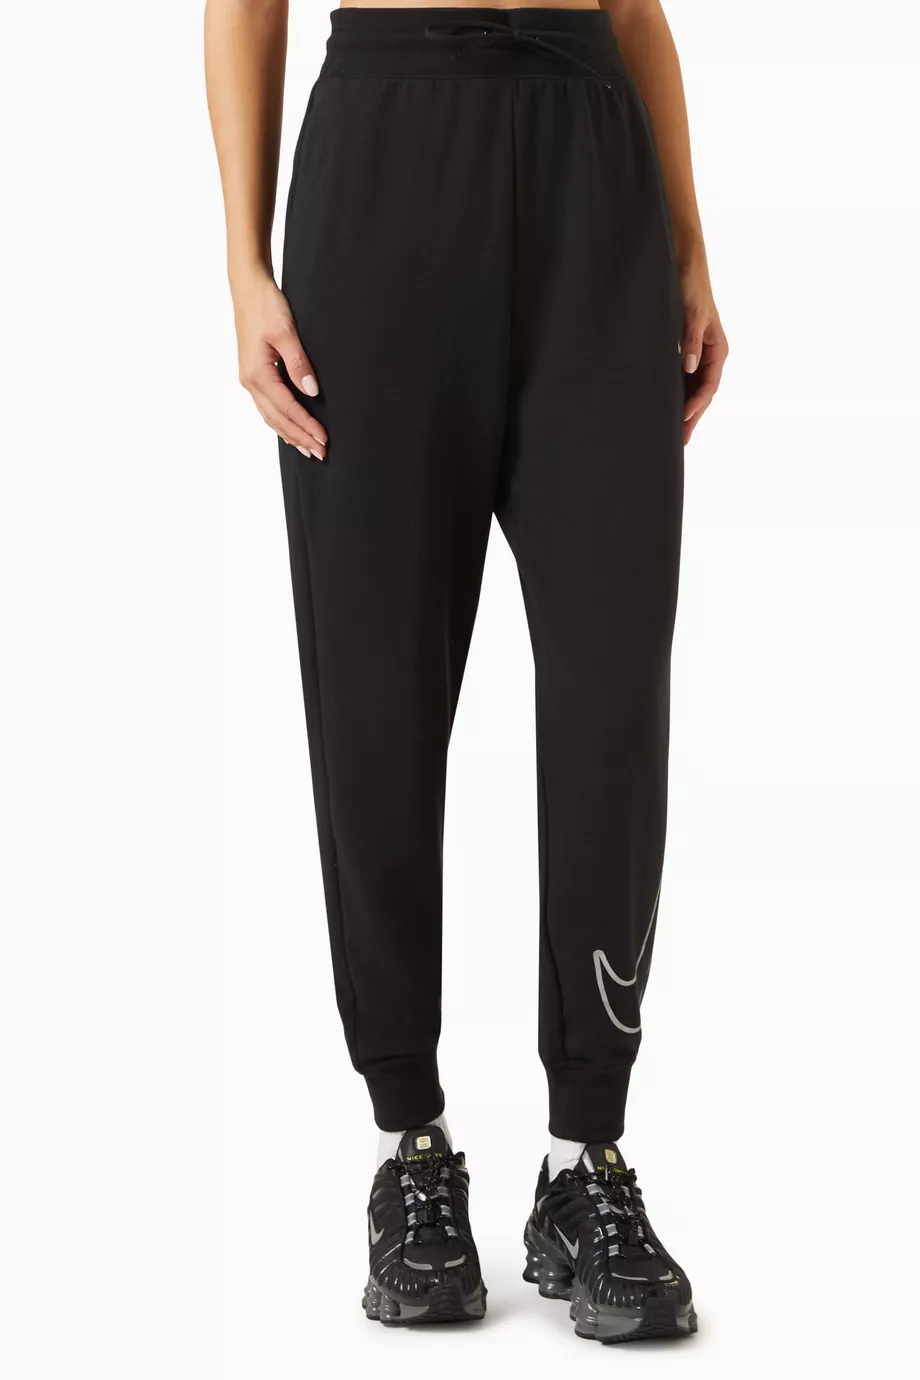 Buy Nike Black One 7/8 Graphic Pants in French Terry for Women in Saudi